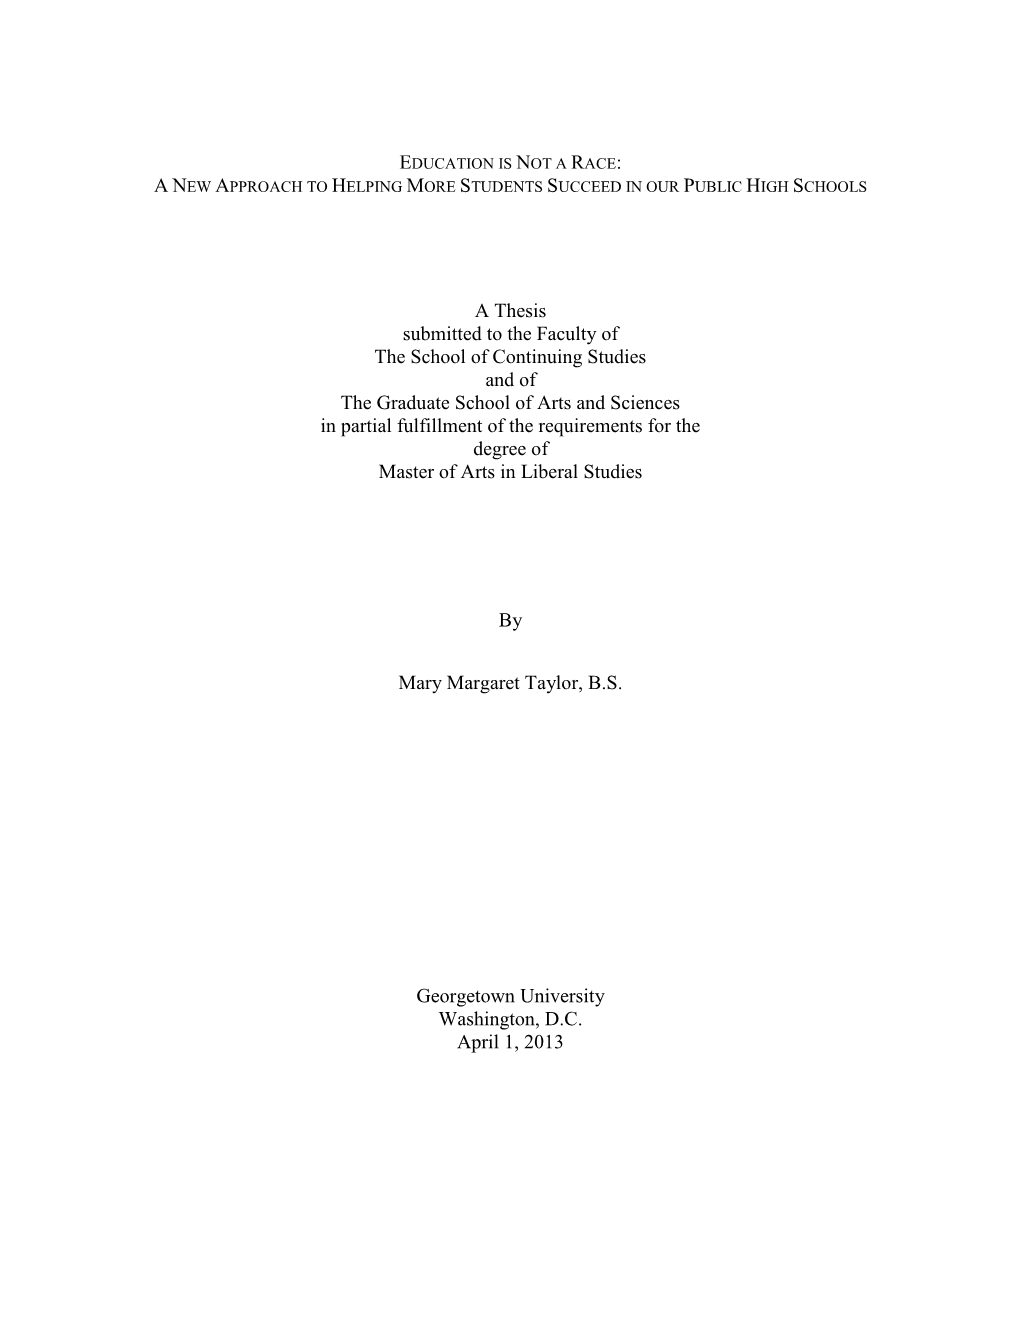 A Thesis Submitted to the Faculty of the School of Continuing Studies and of the Graduate School of Arts and Sciences in Pa